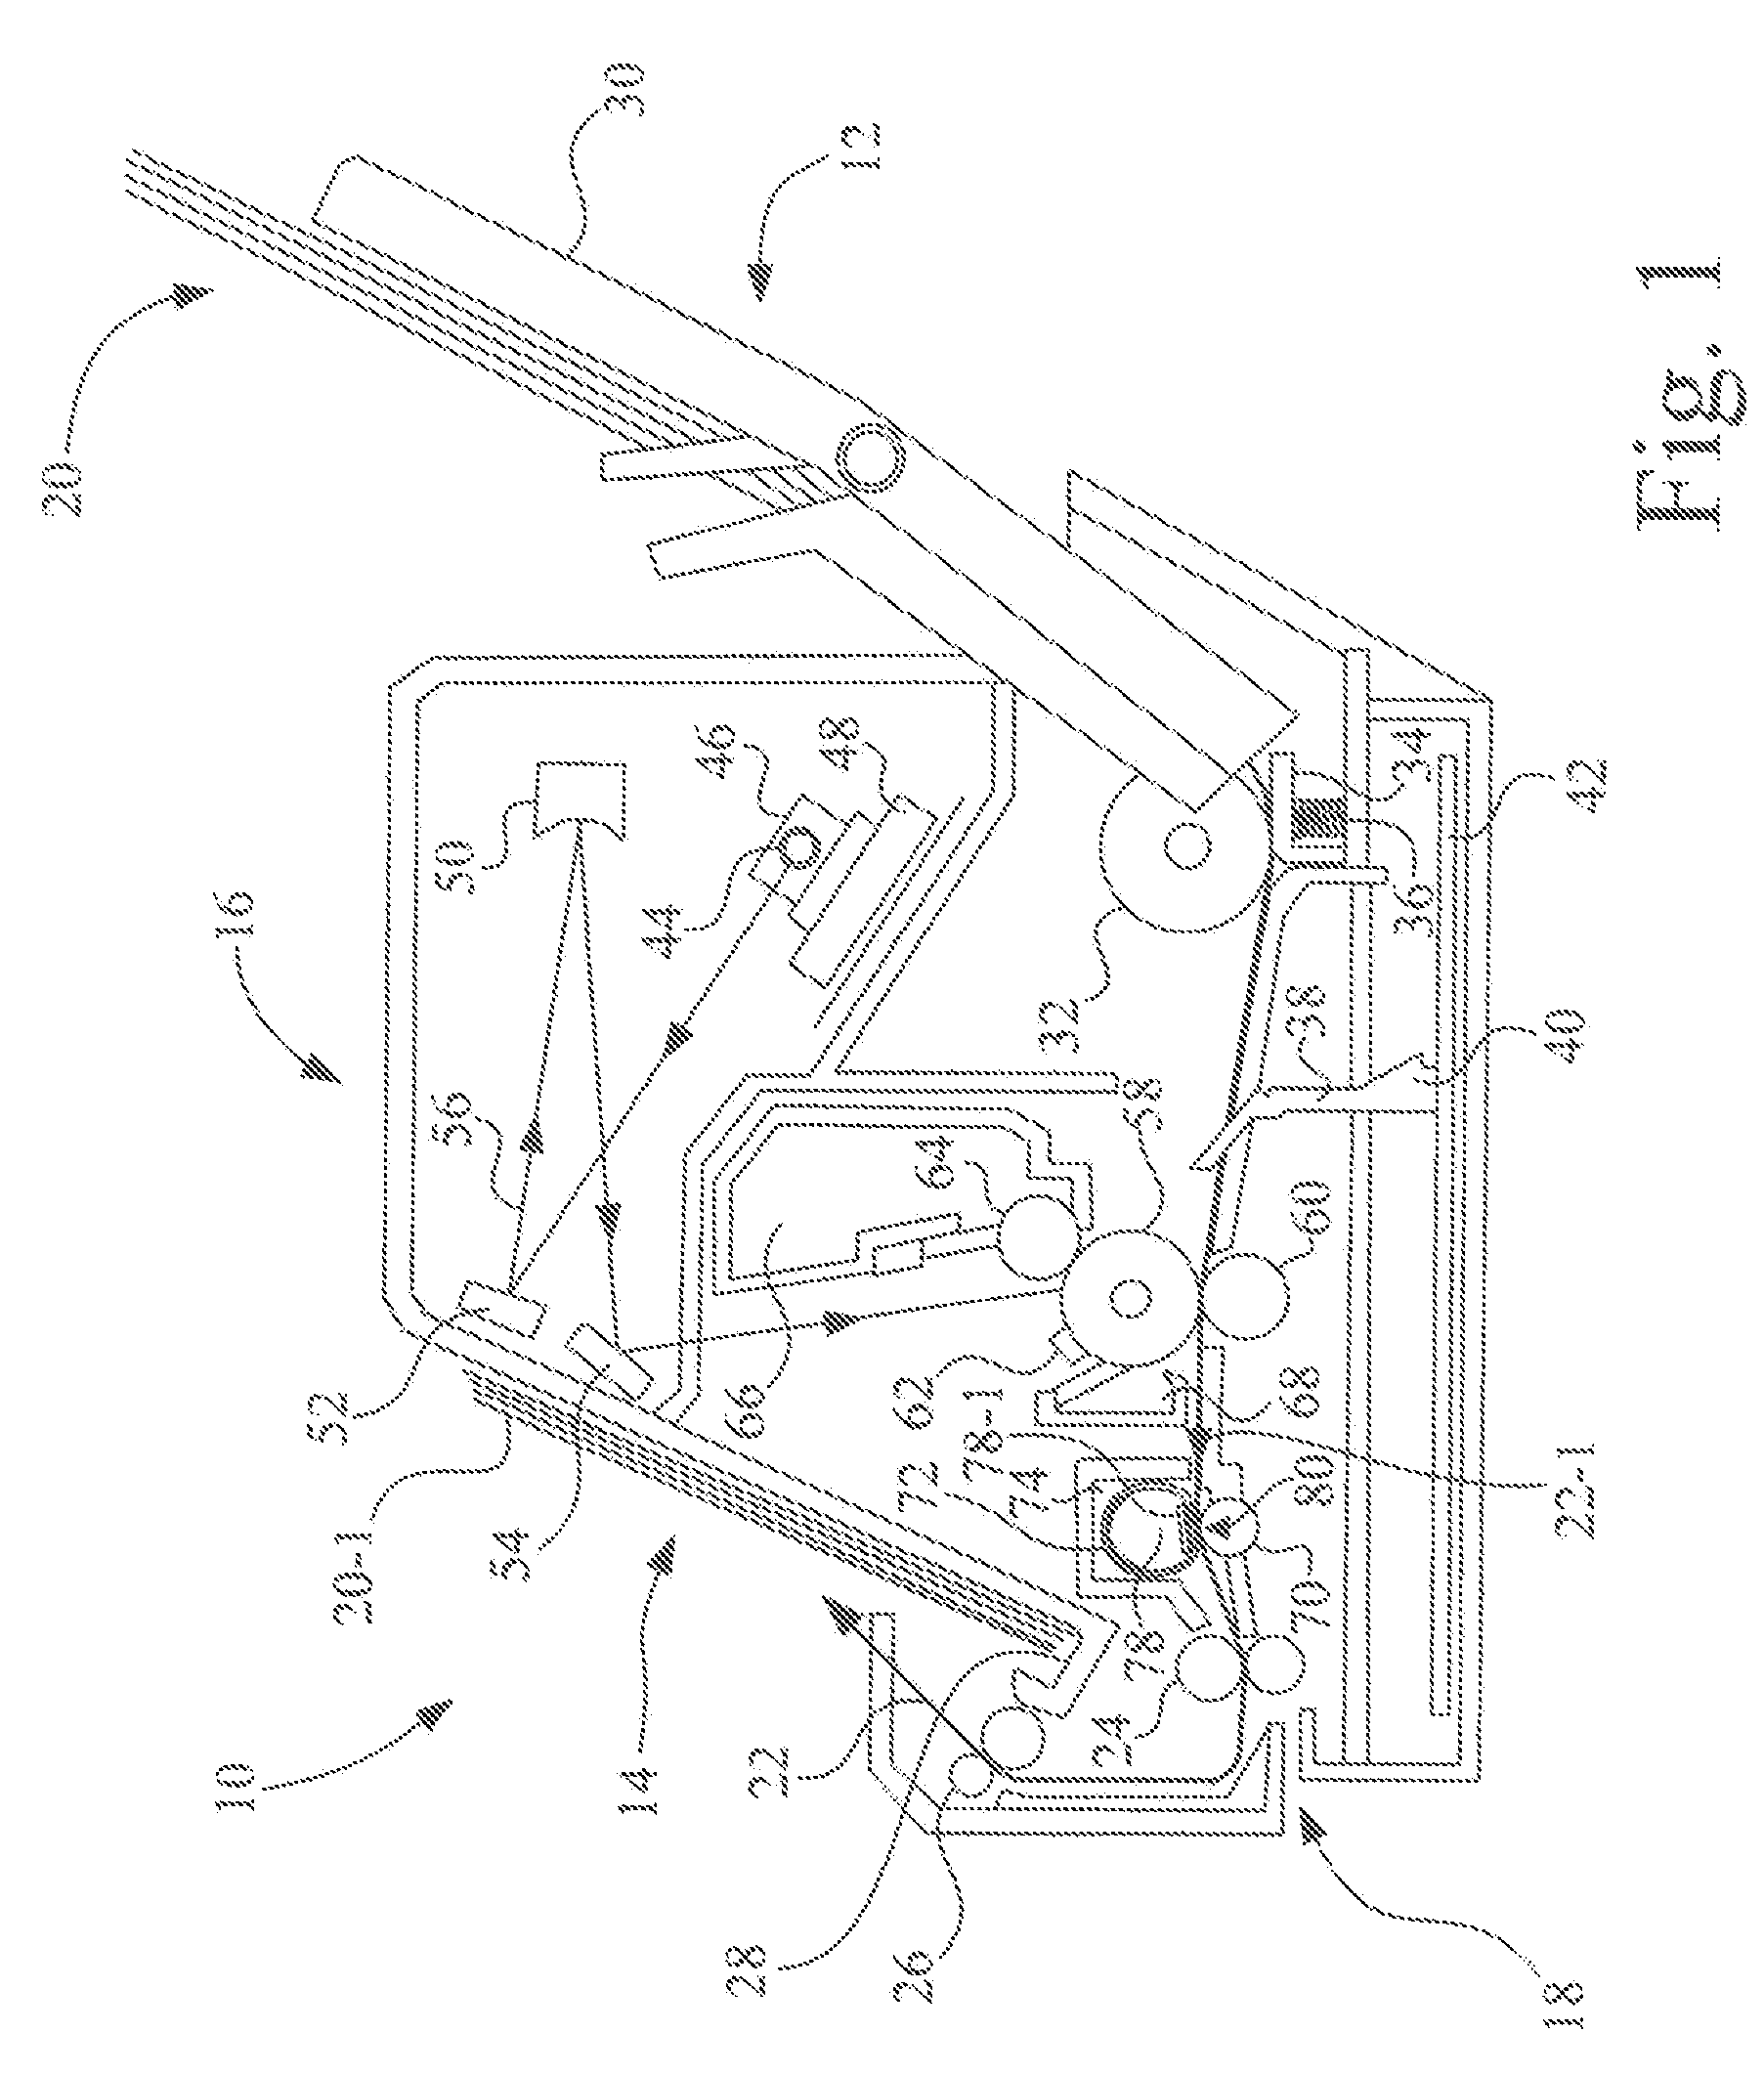 Fuser assembly having oil retention features